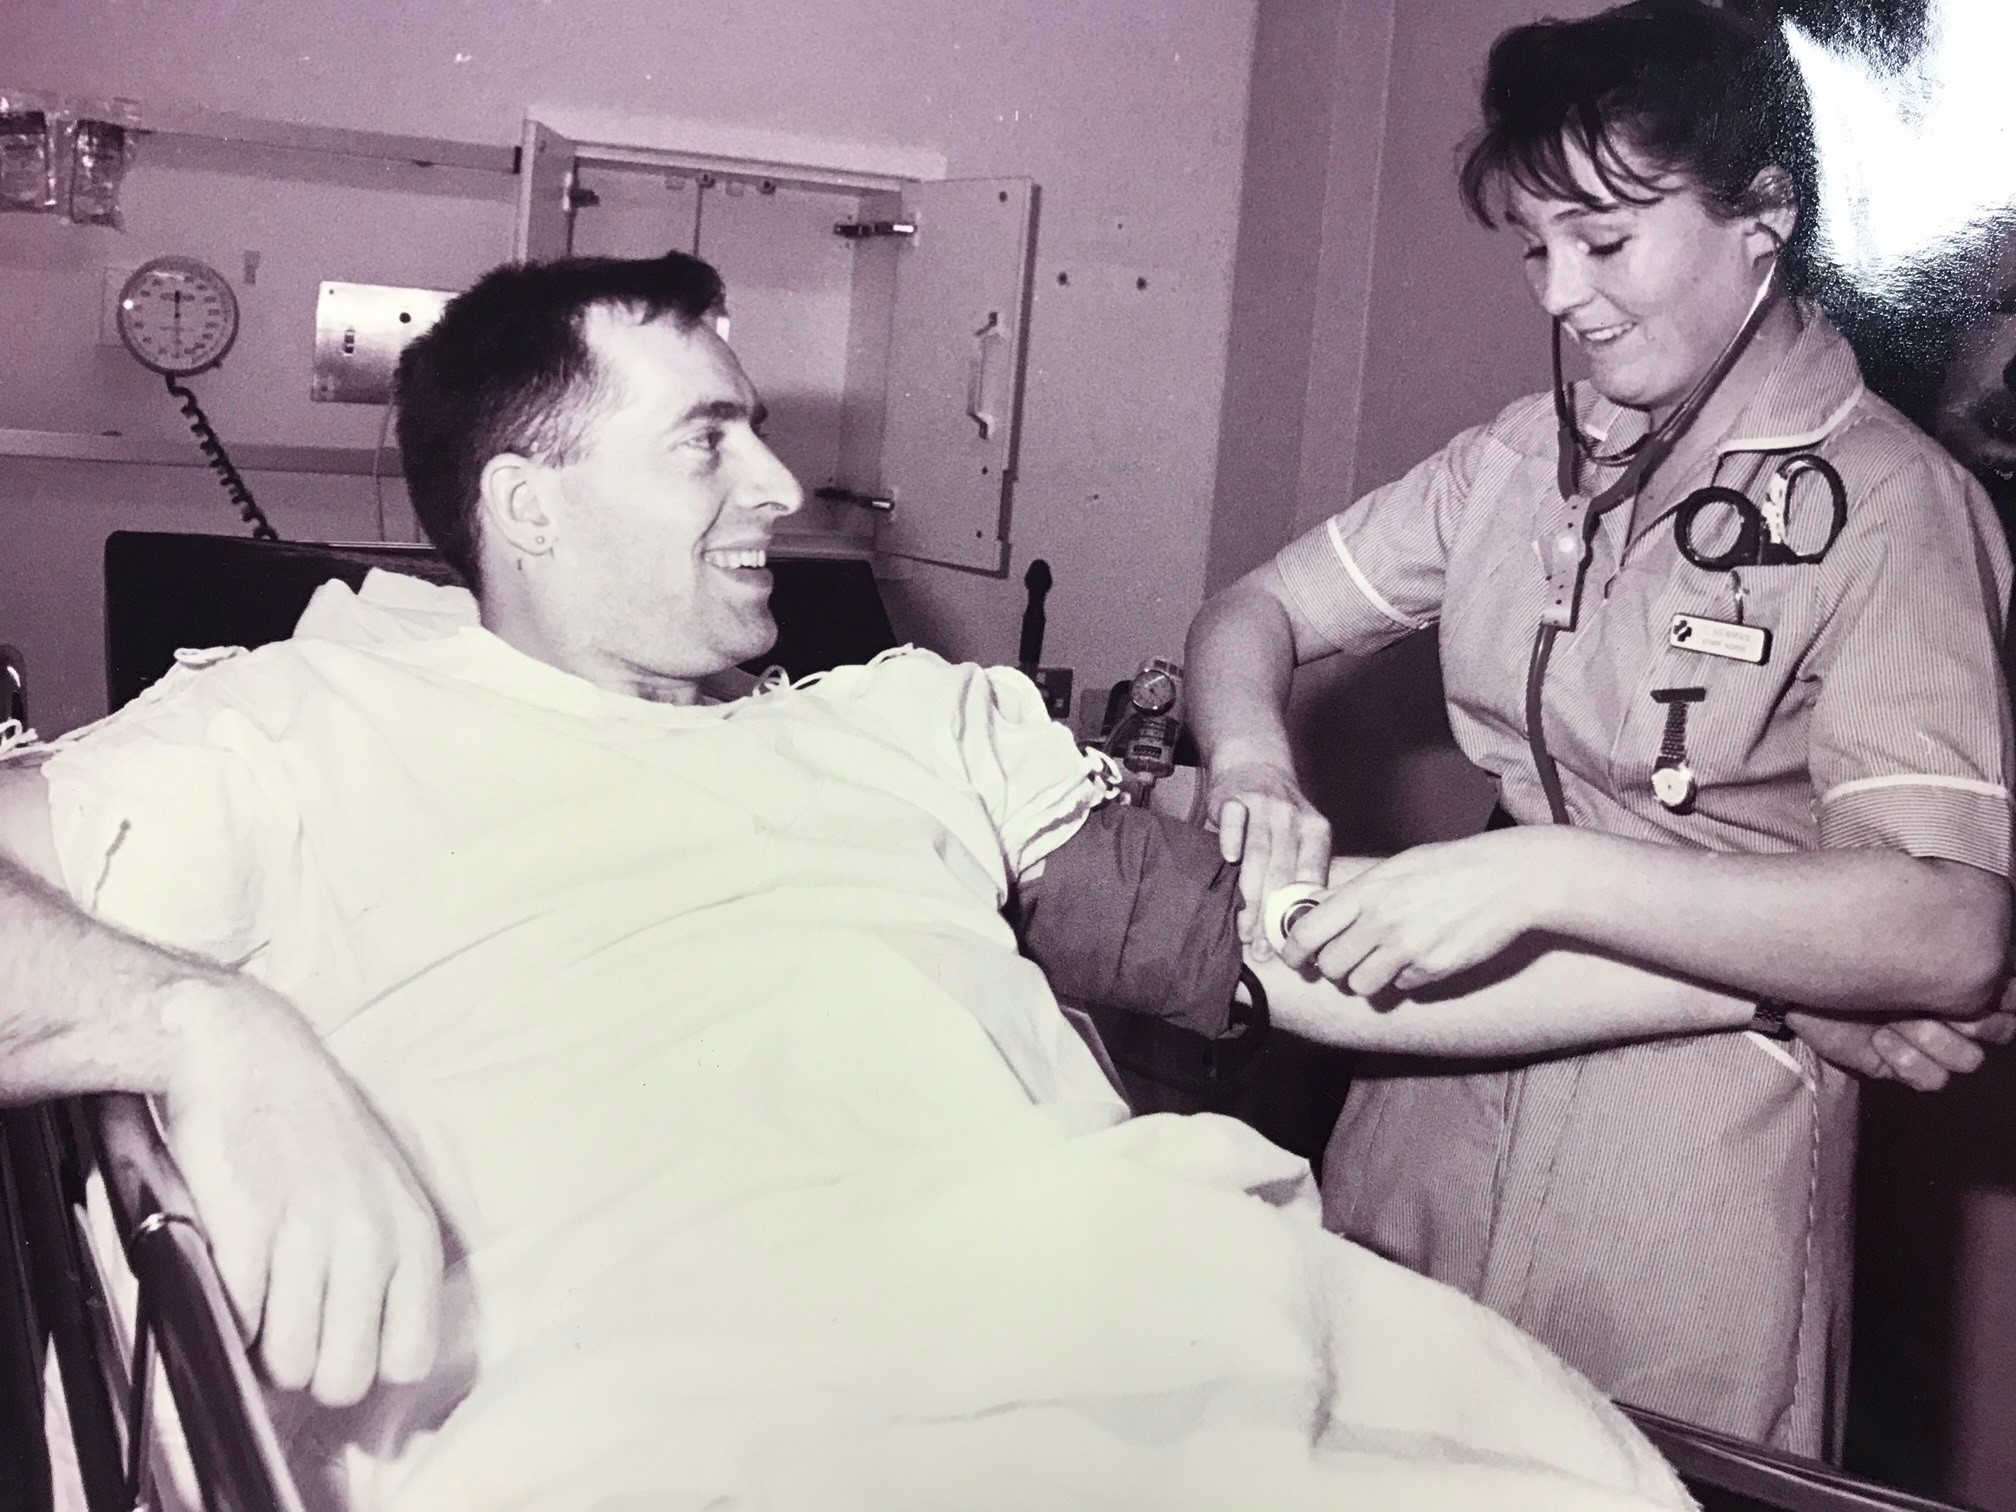 Care - nurse Tracy Newman treates Andy ruston in the emergency department in 1993